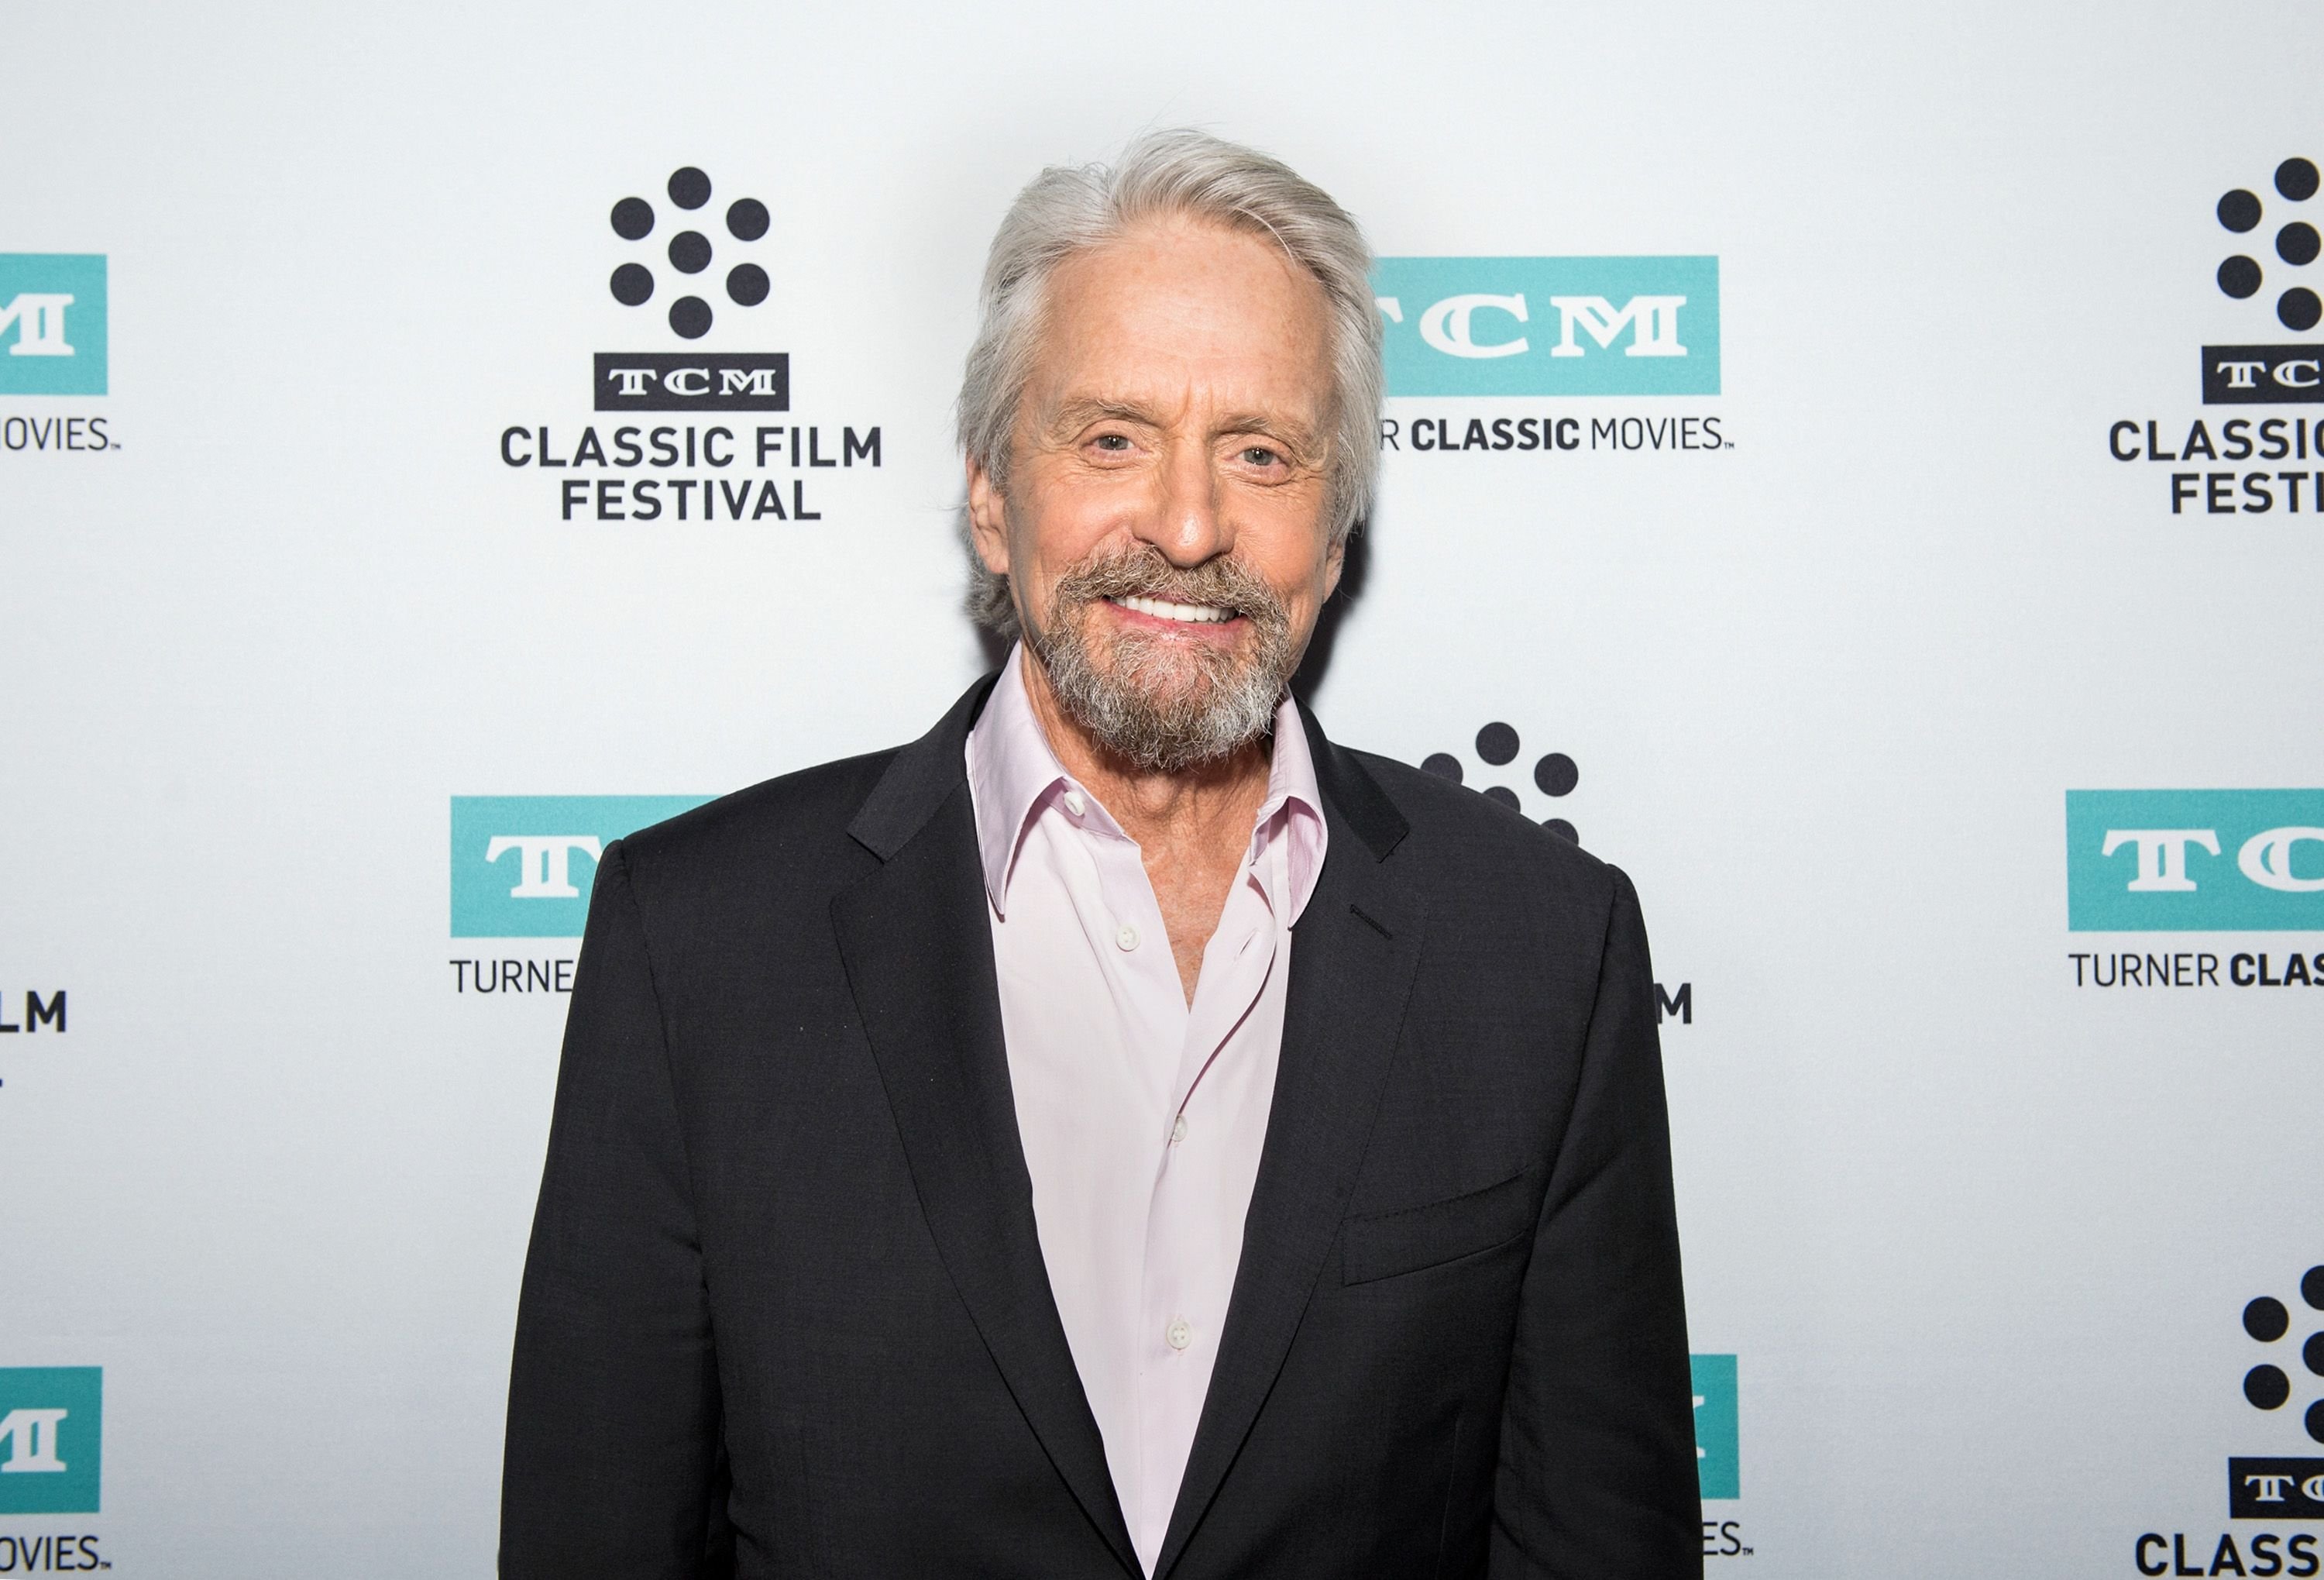 Michael Douglas attending the Turner Classics Movies, Classic Film Festival. Source | Photo: Getty Images